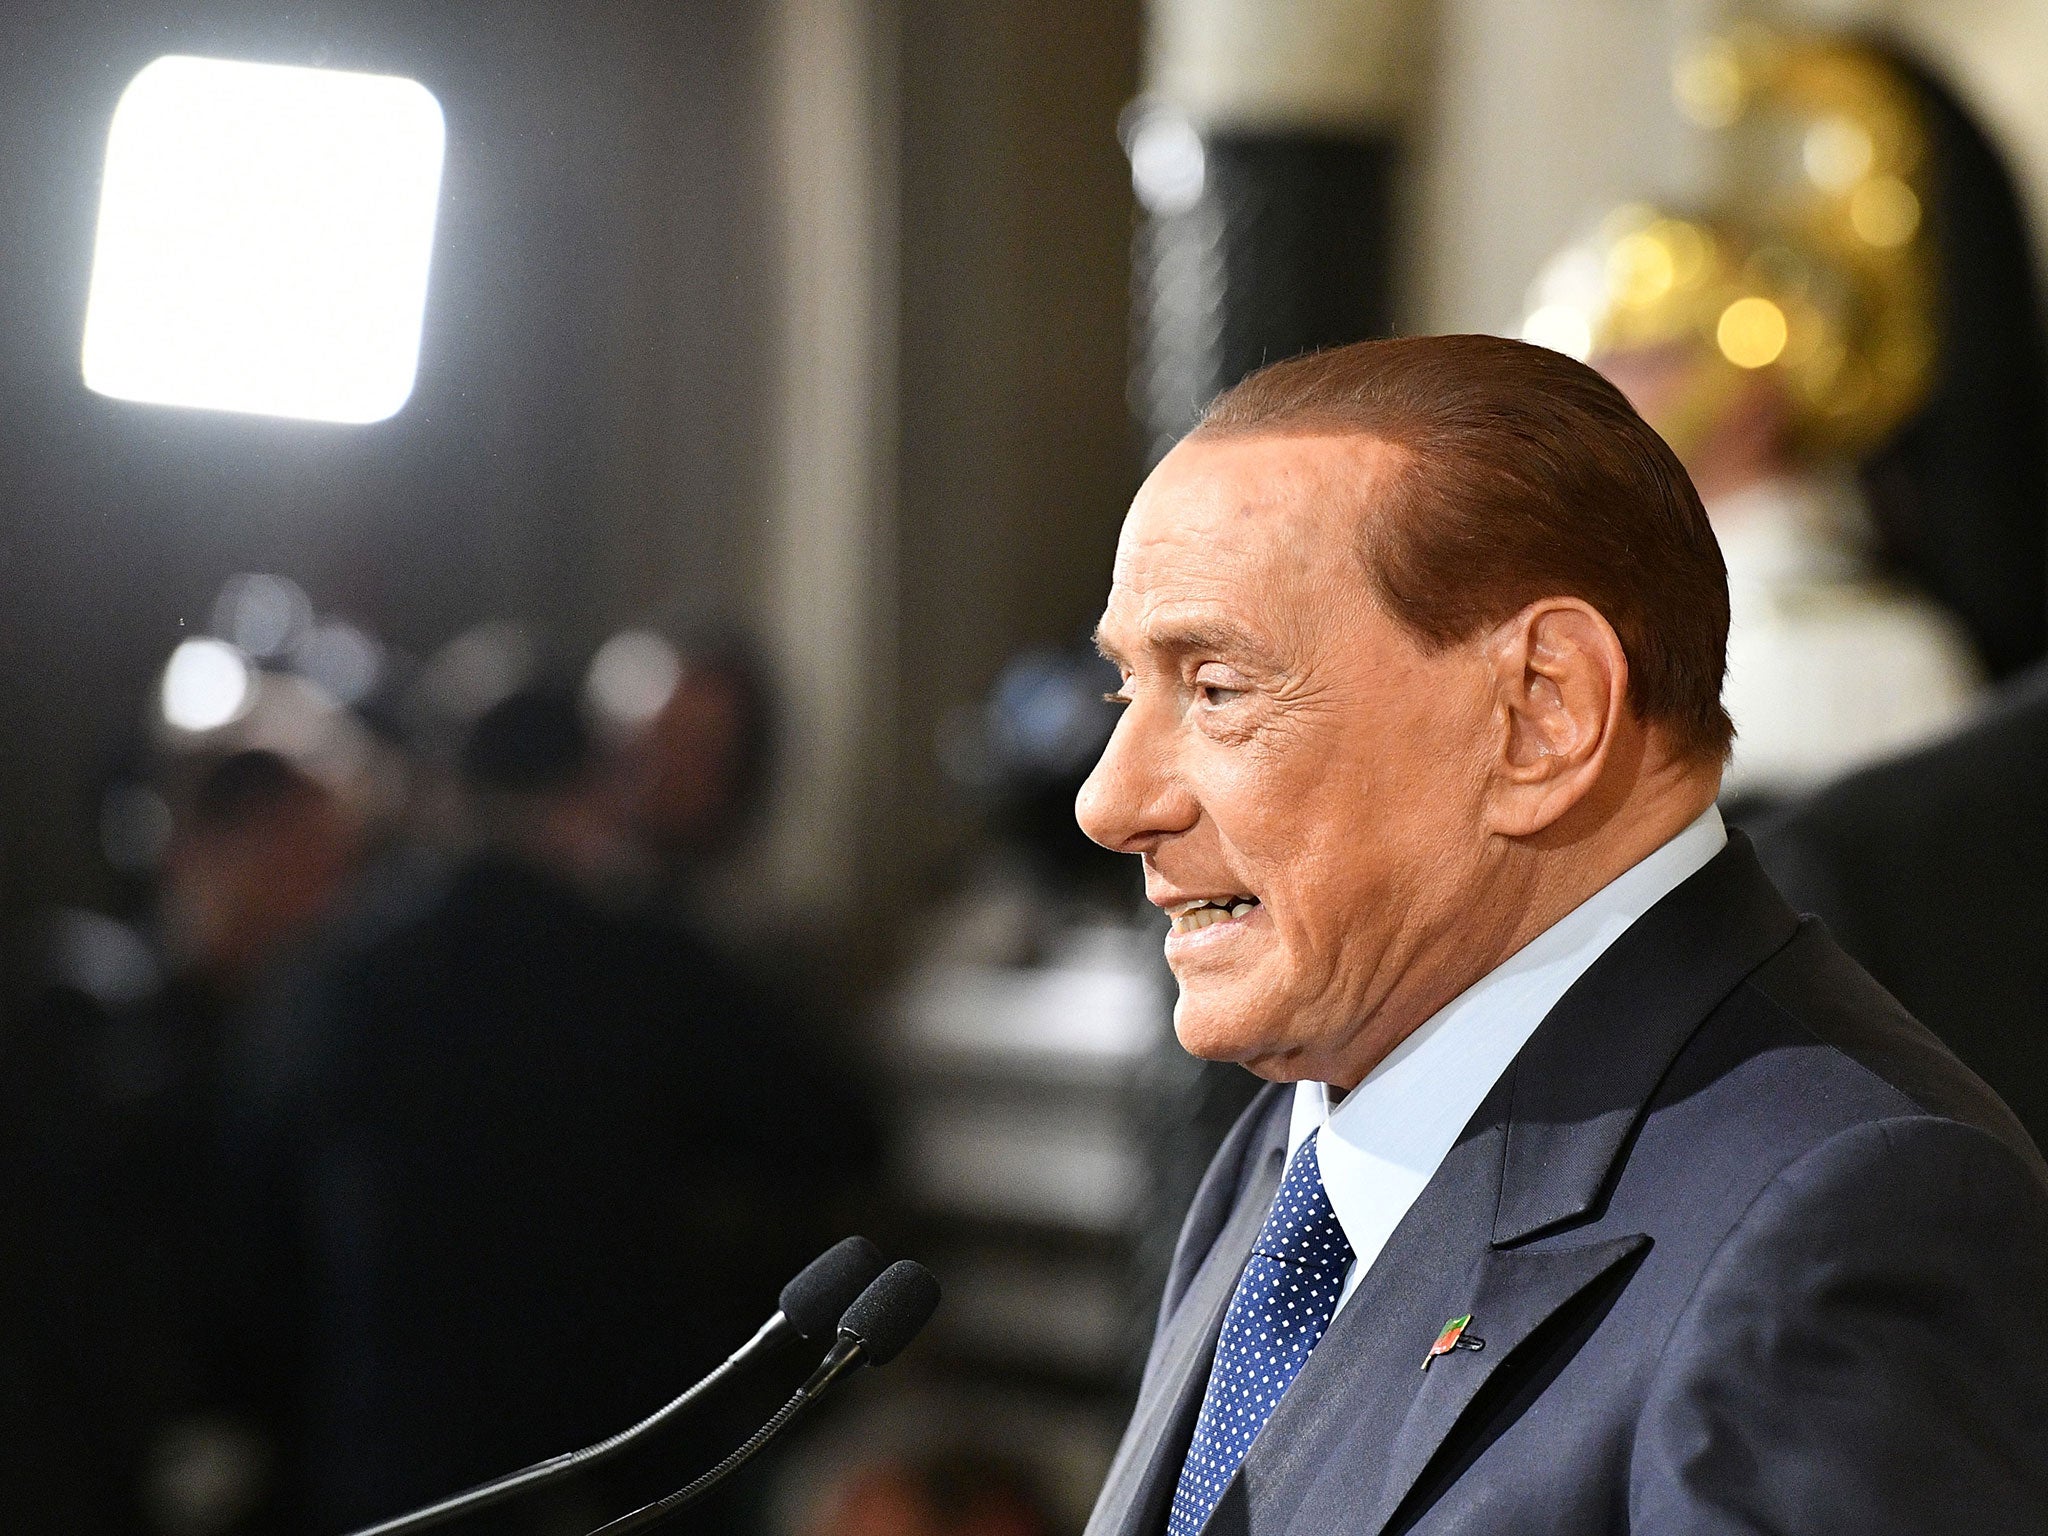 Silvio Berlusconi, a successful businessman, media mogul and populist politician in Italy, died last year at the age of 86